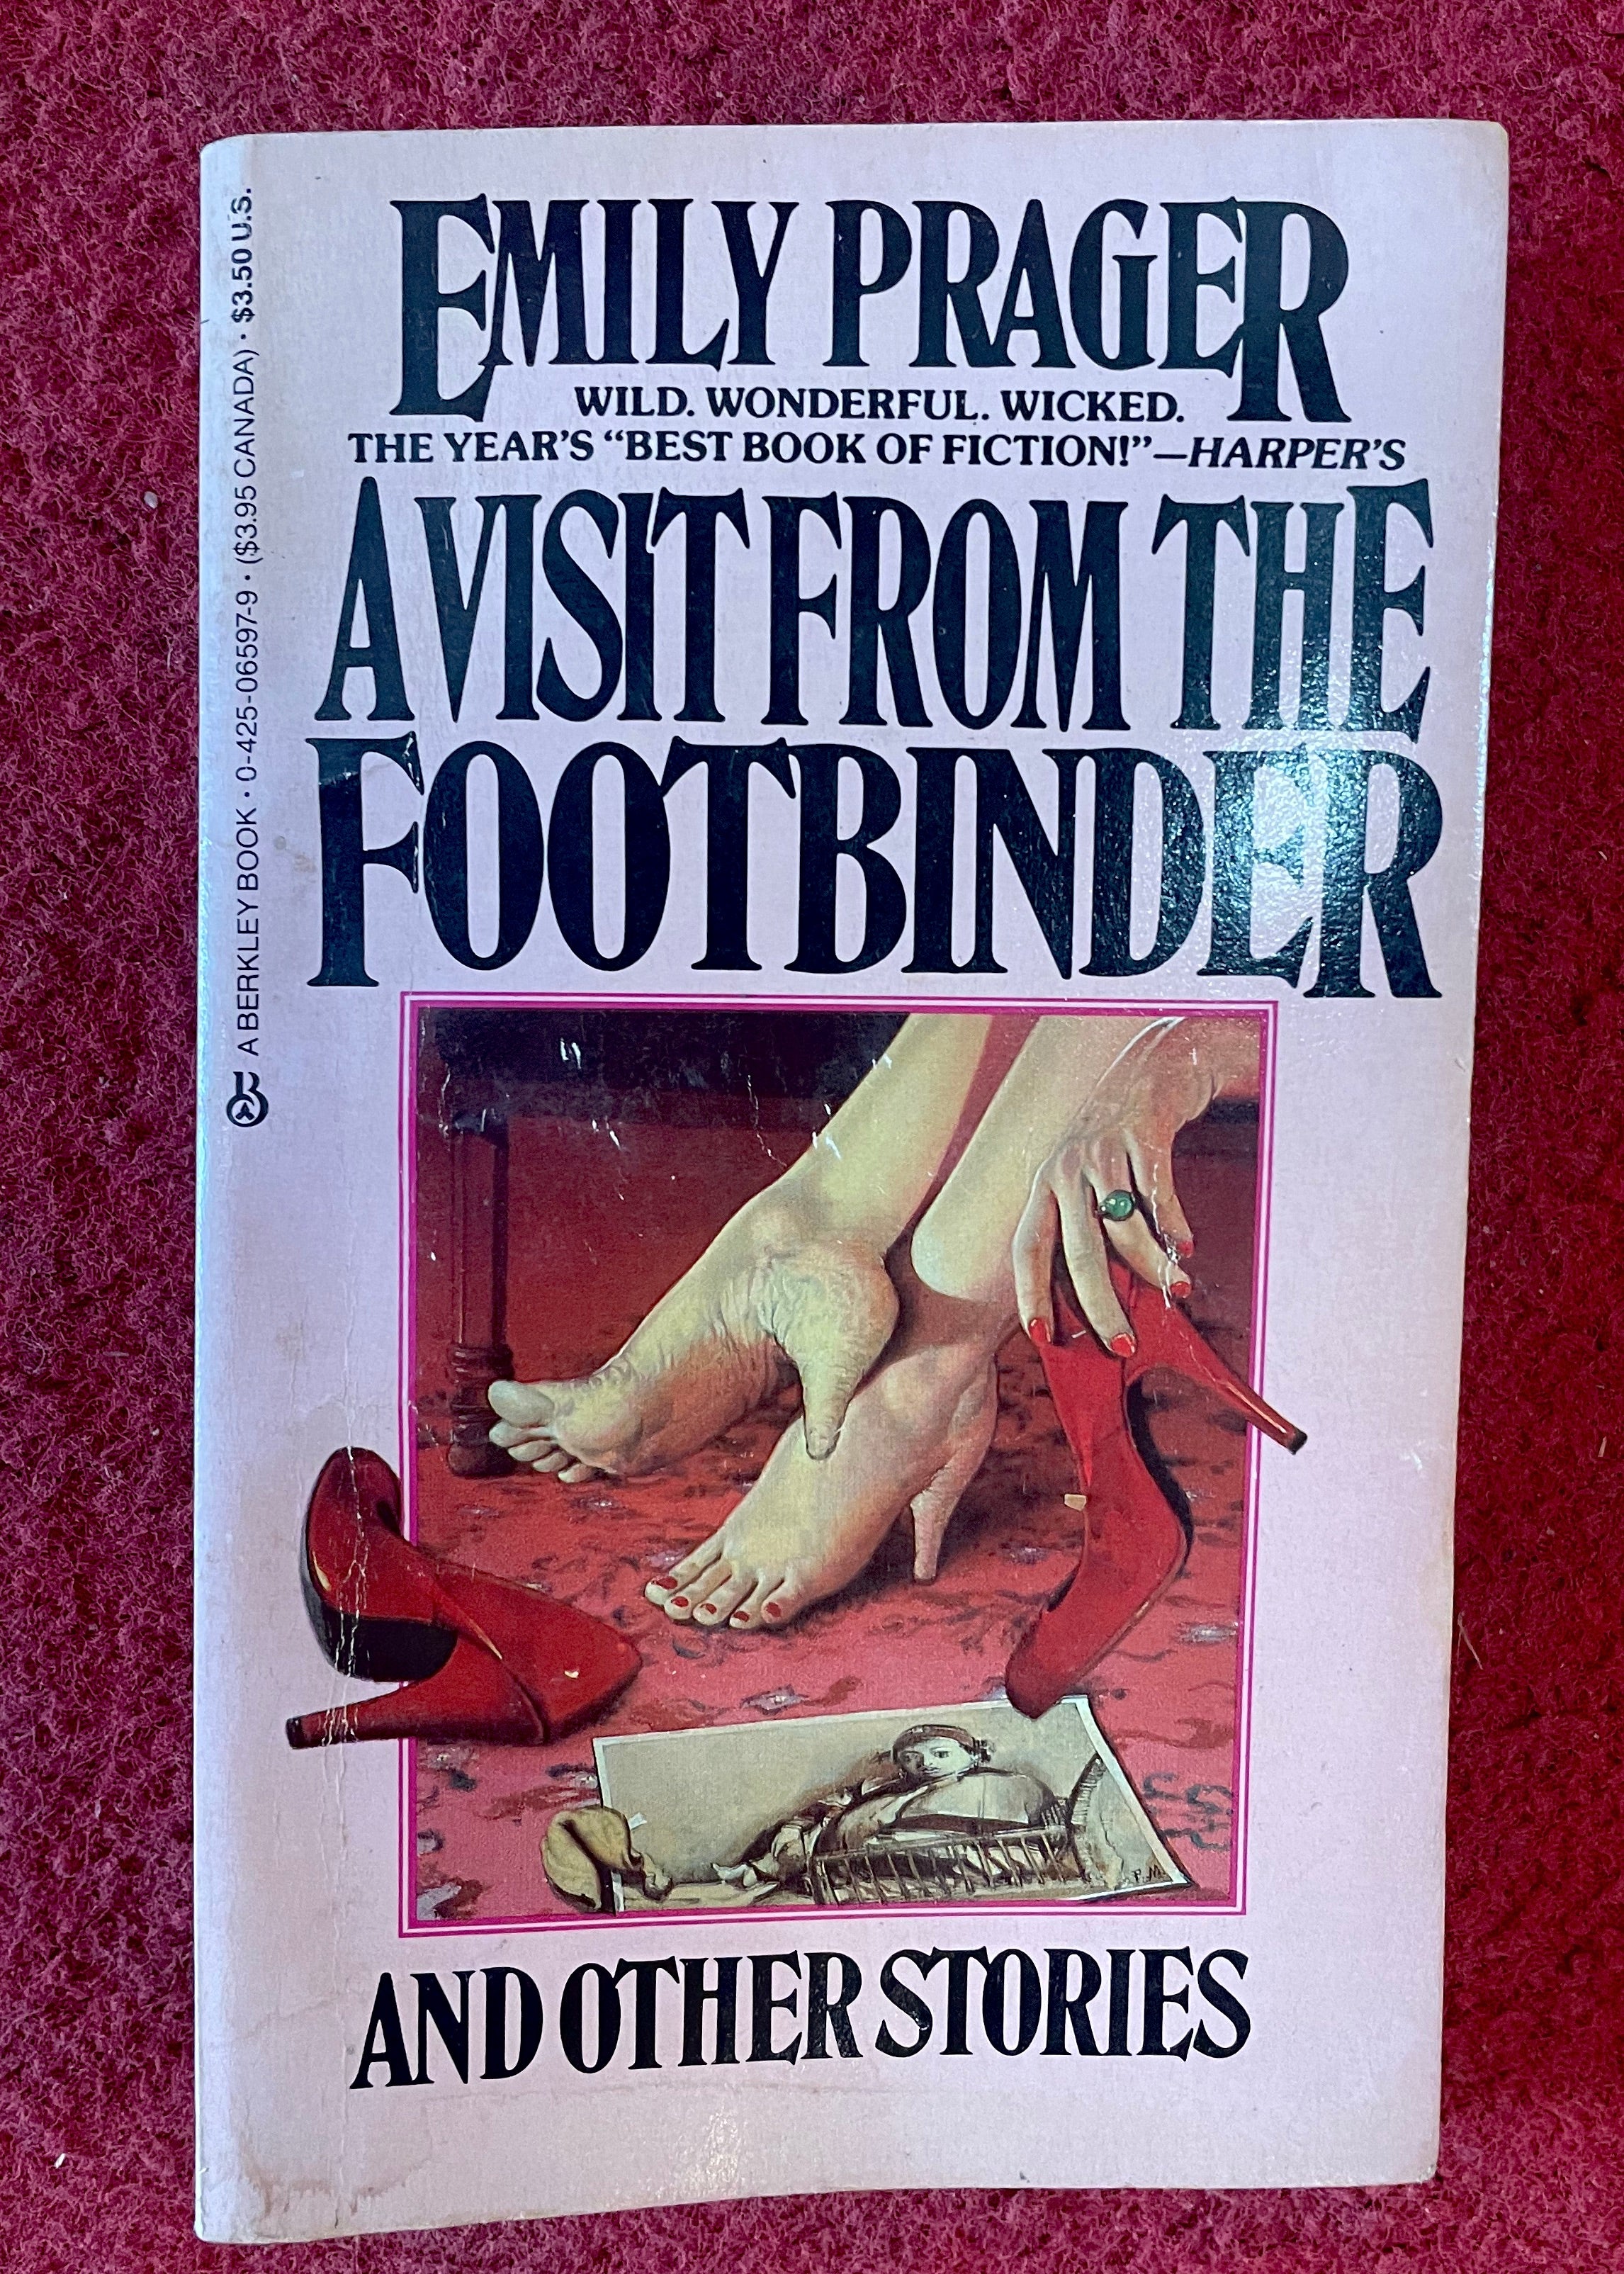 "A Visit From The Footbinder, and Other Stories" by Emily Prager*